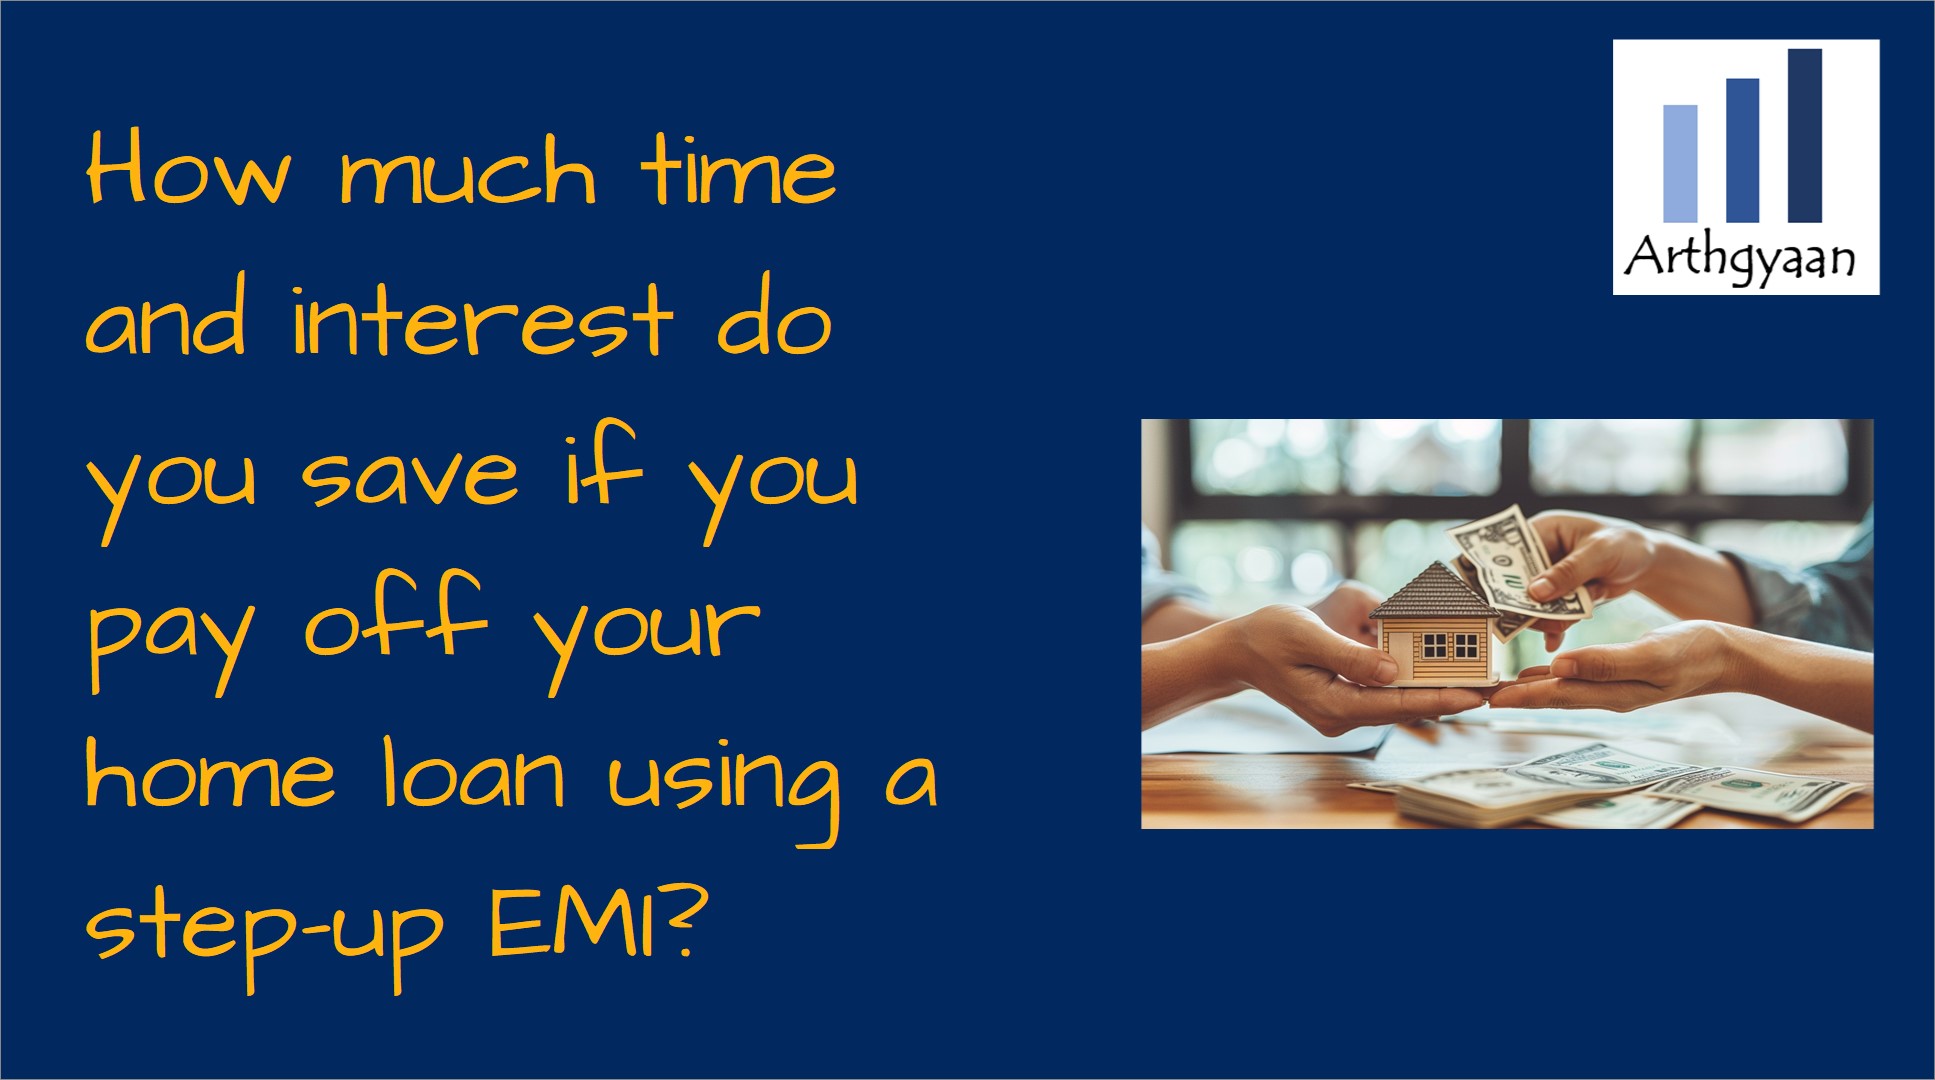 How much time and interest do you save if you pay off your home loan using a step-up EMI?